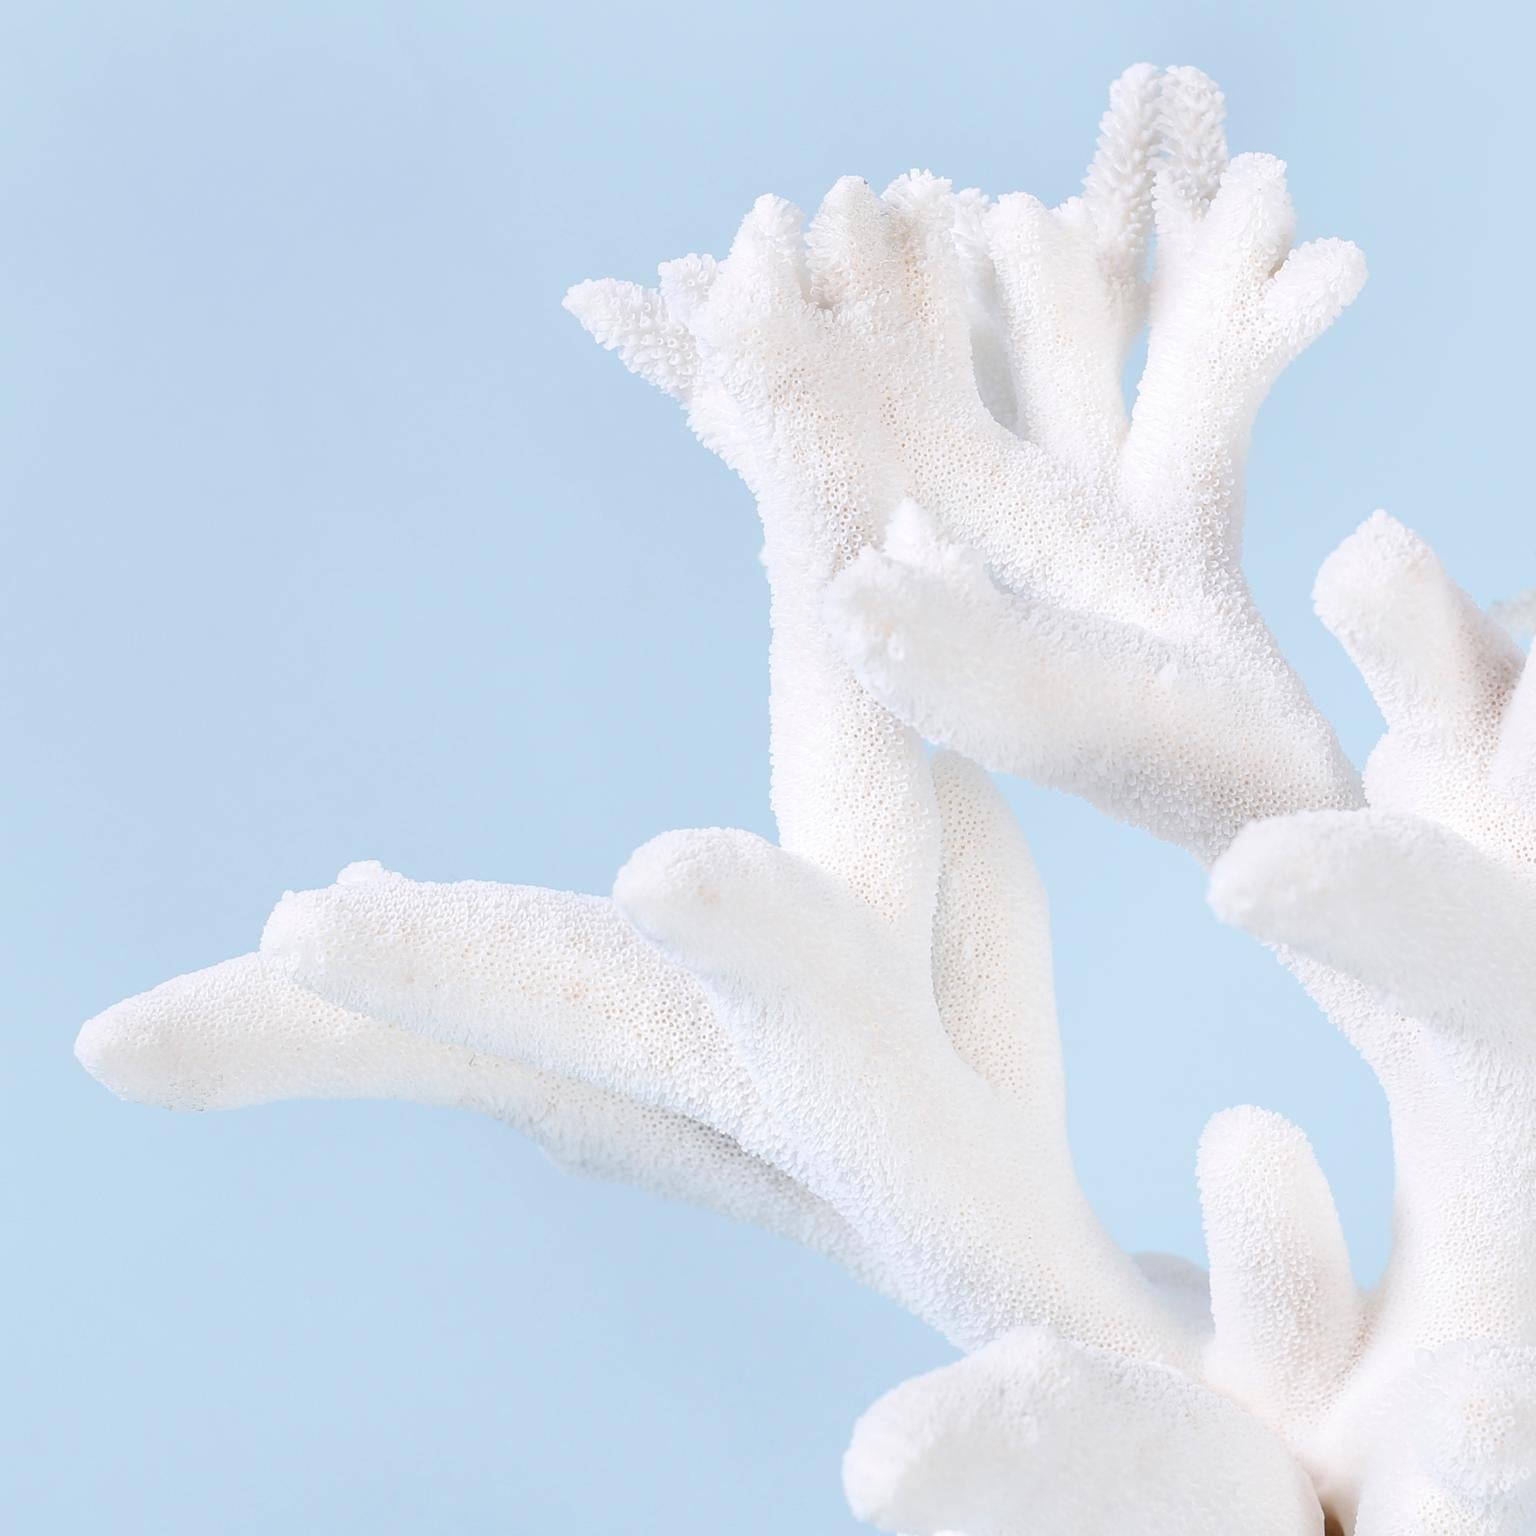 White staghorn coral specimen with its bleached white color and sea inspired texture and form presented on a Lucite base to enhance the sculptural elements.